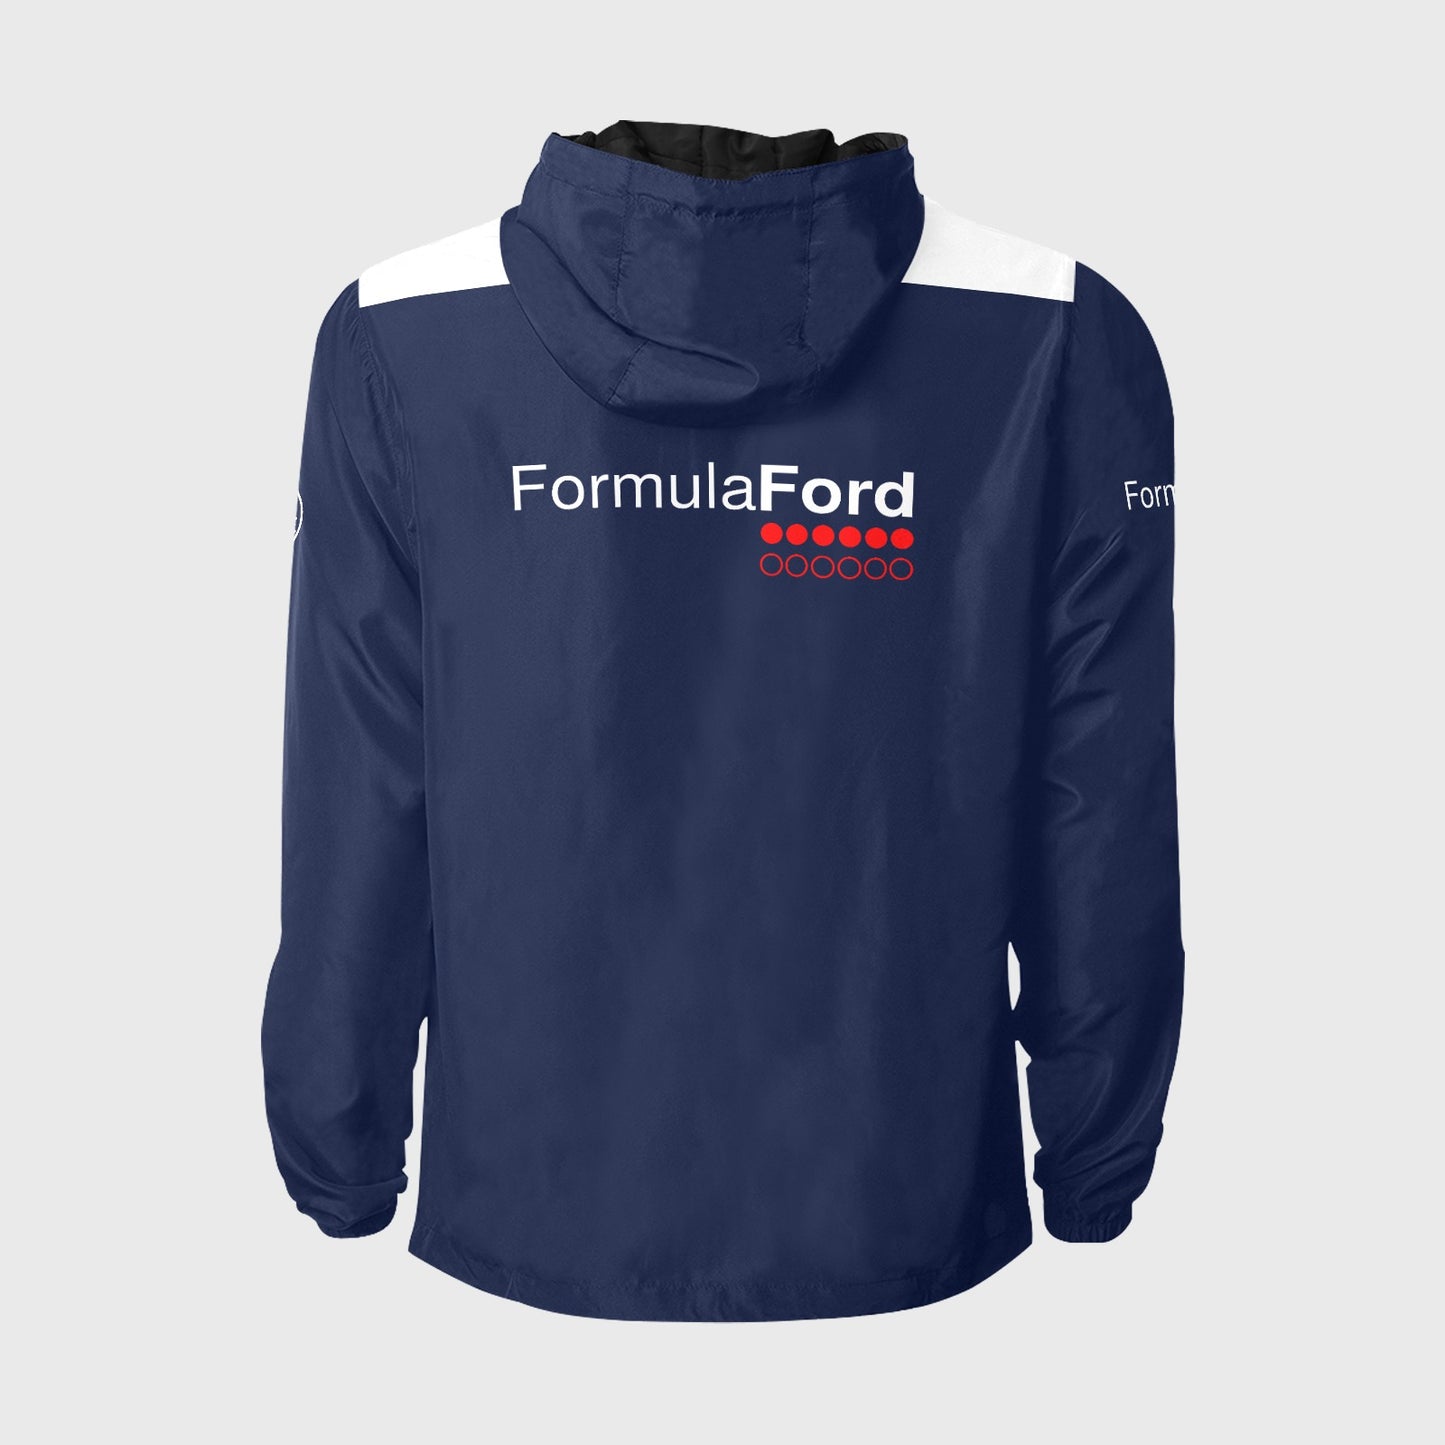 FORMULA FORD Official Waterproof + Quilted windbreaker jacket with hood - Navy